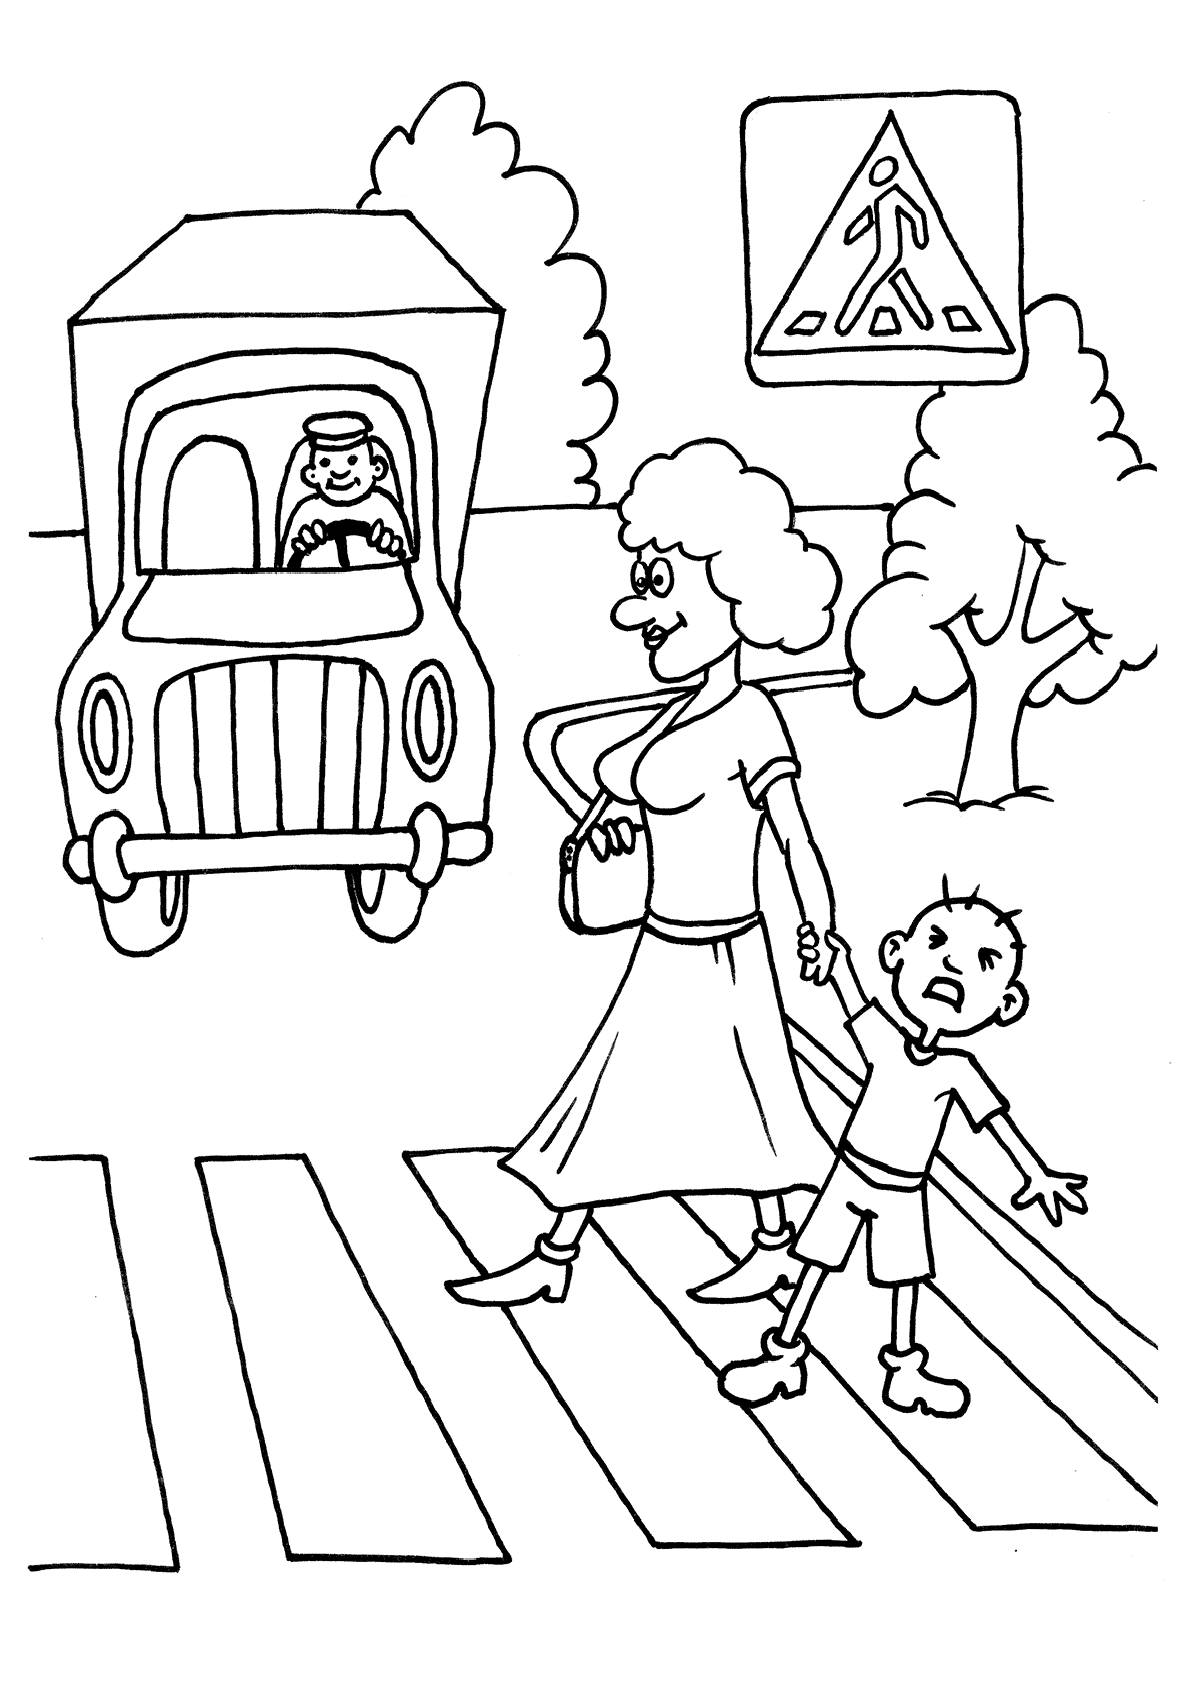 Pedestrian crossing coloring page